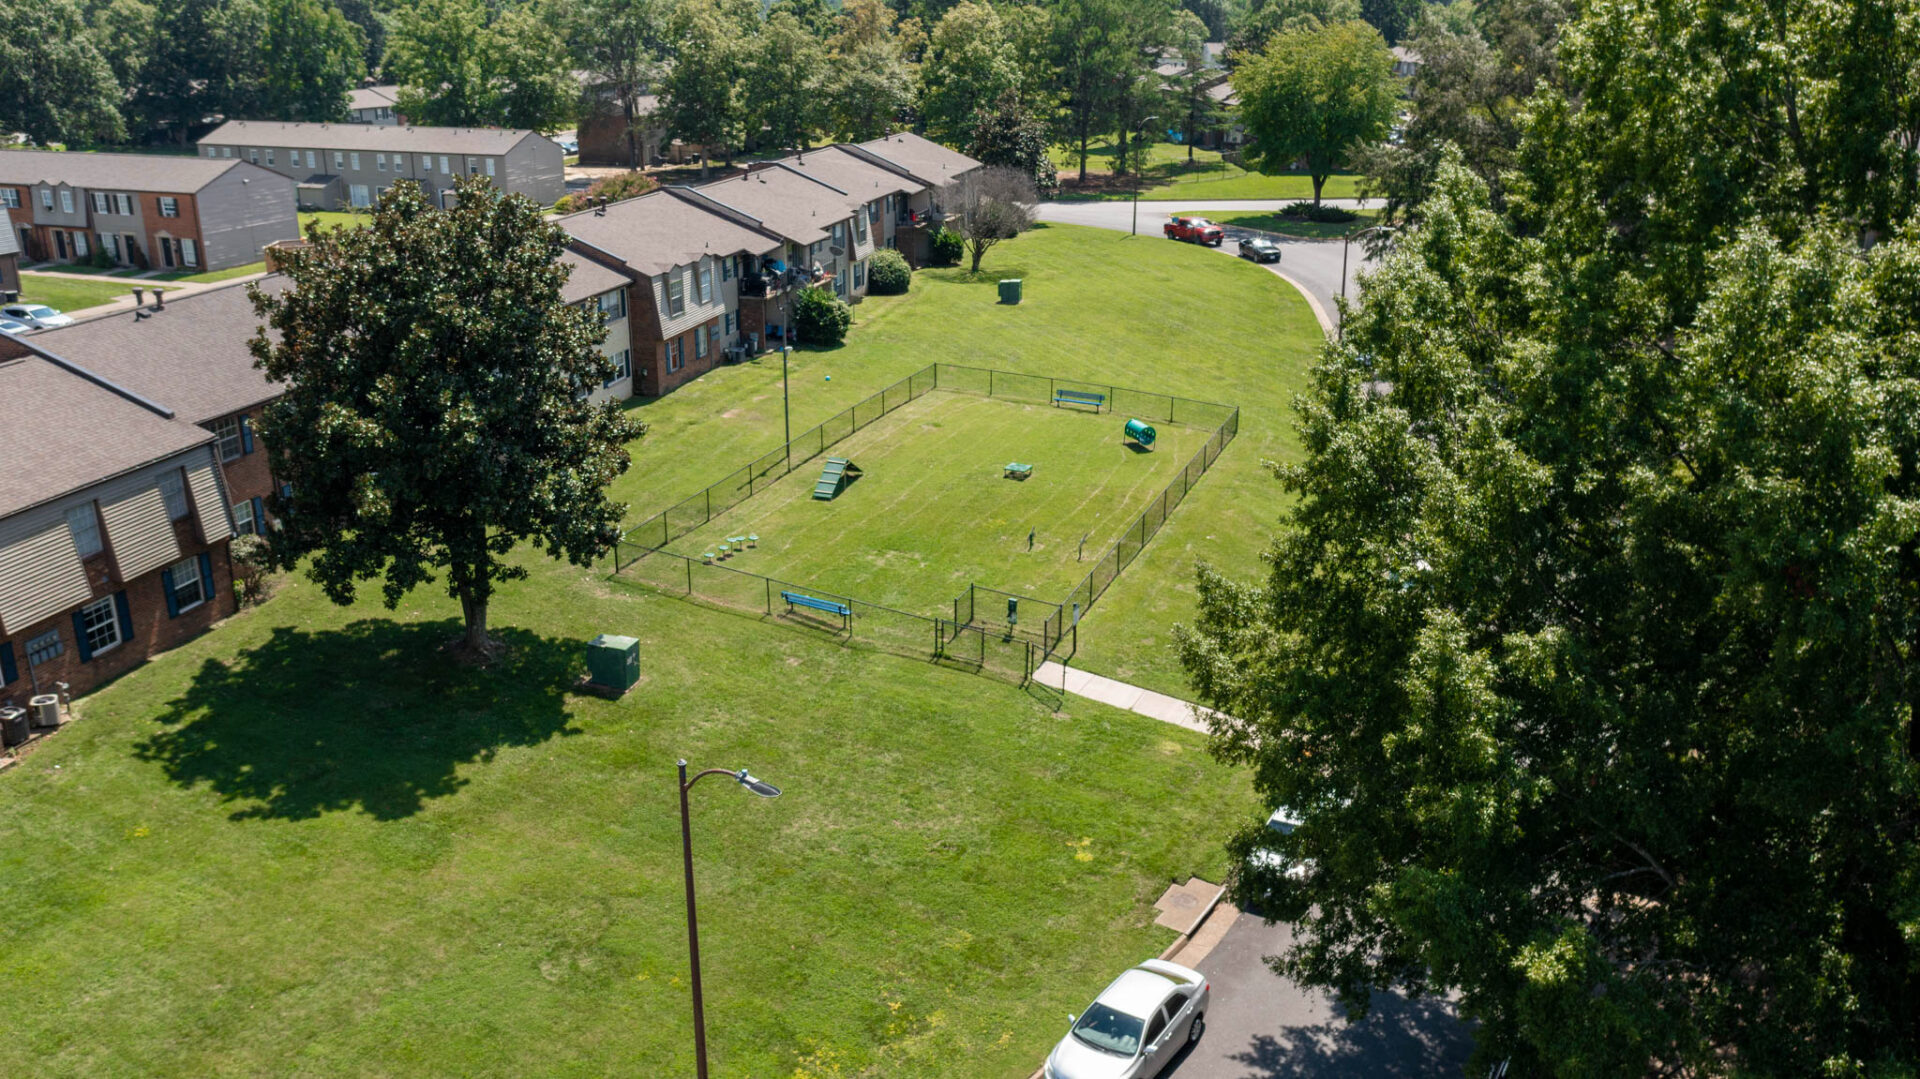 aerial view of dog park in grass